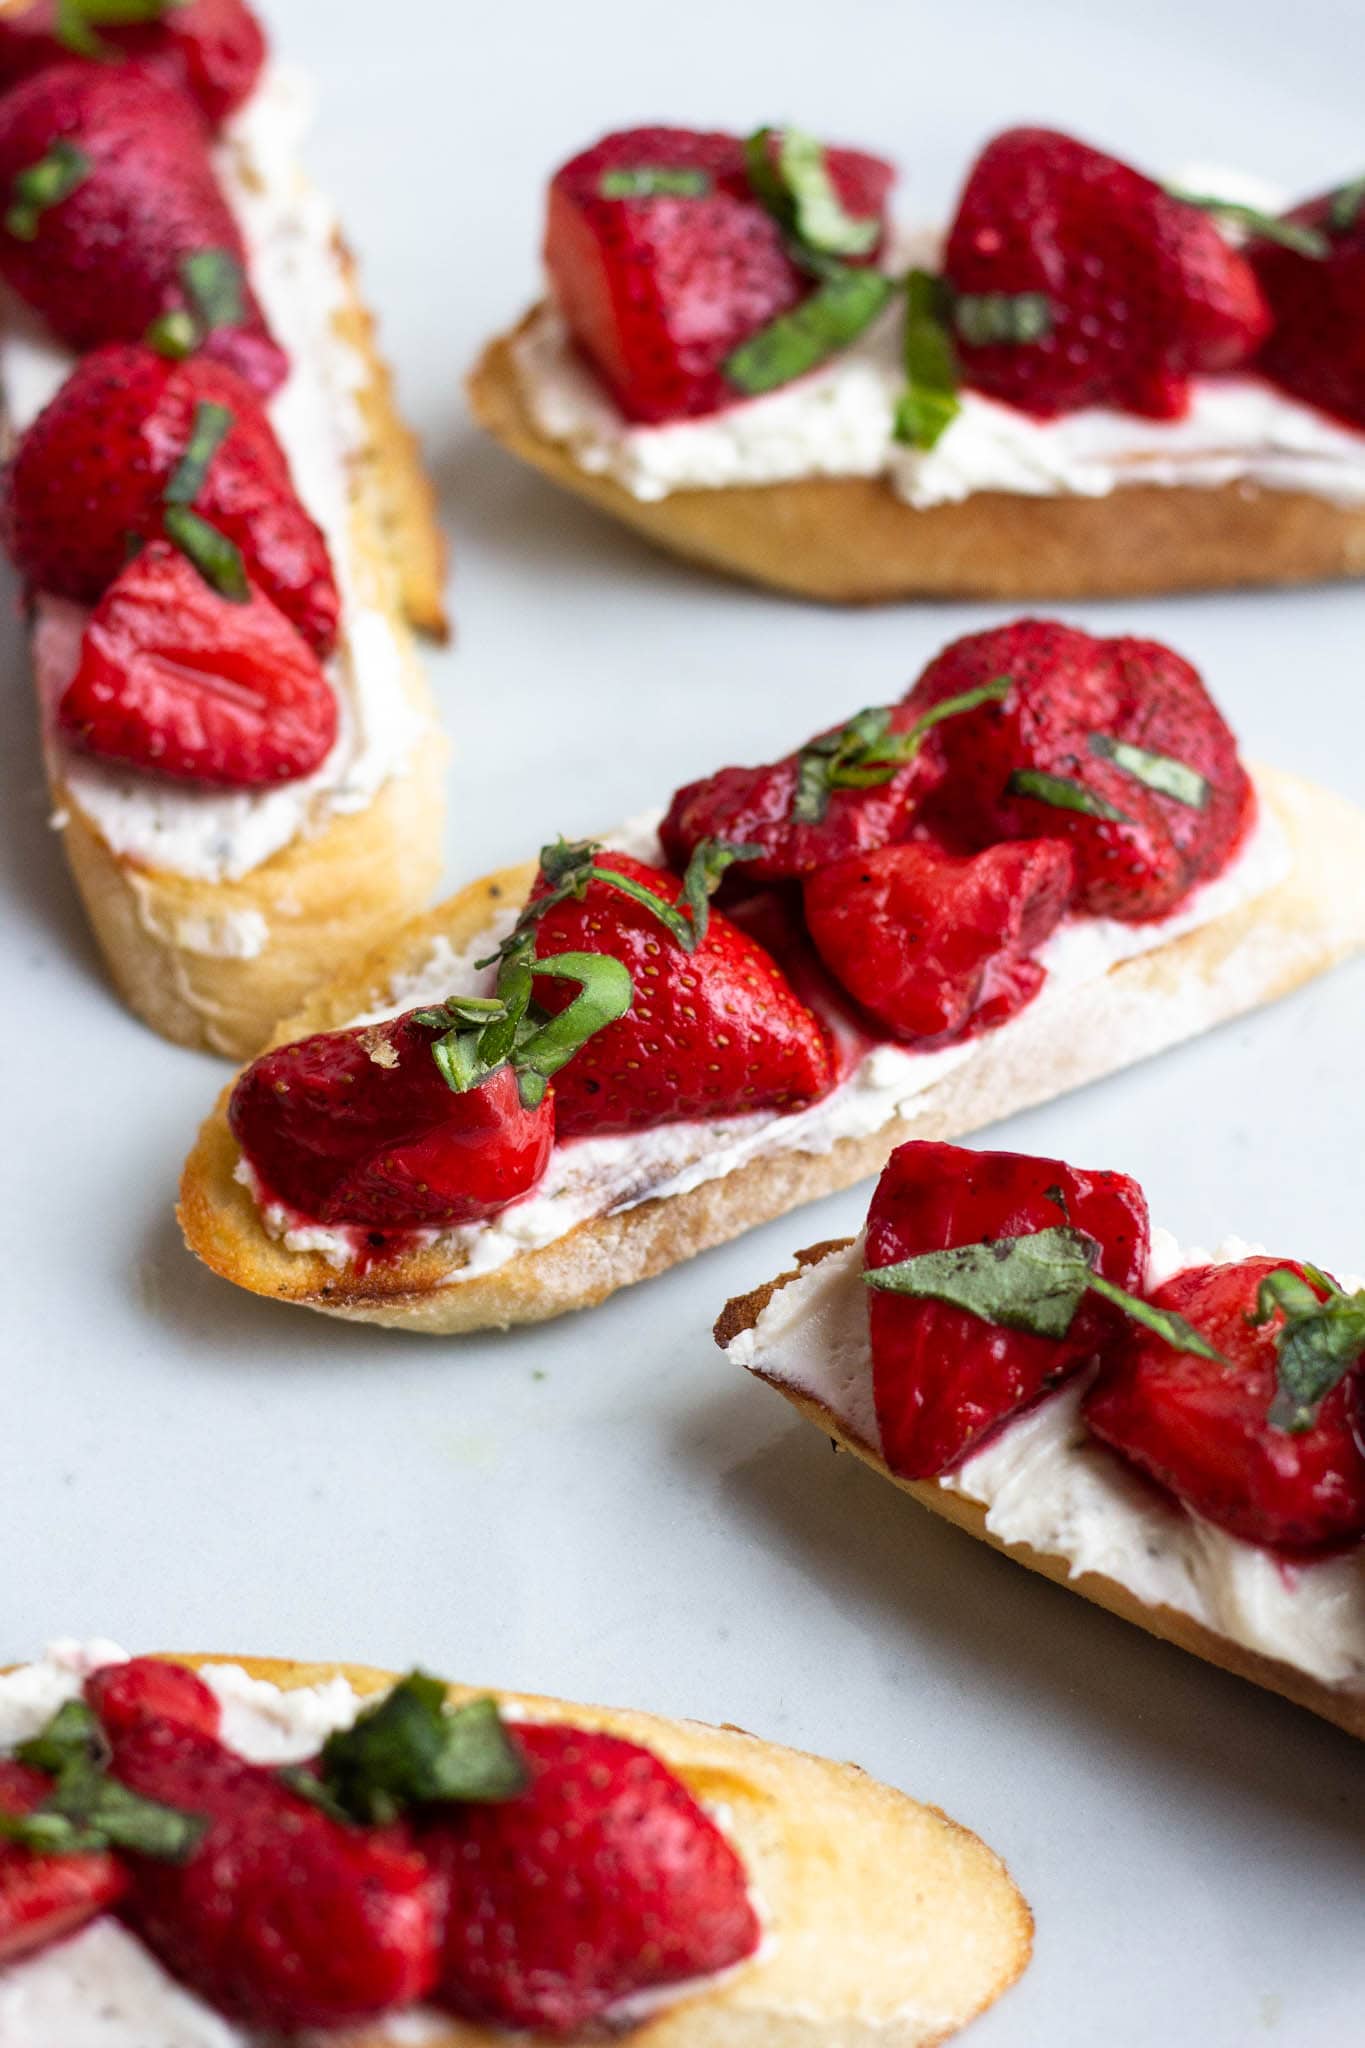 Grilled Strawberry and Rondelé Crostini | So Happy You Liked It